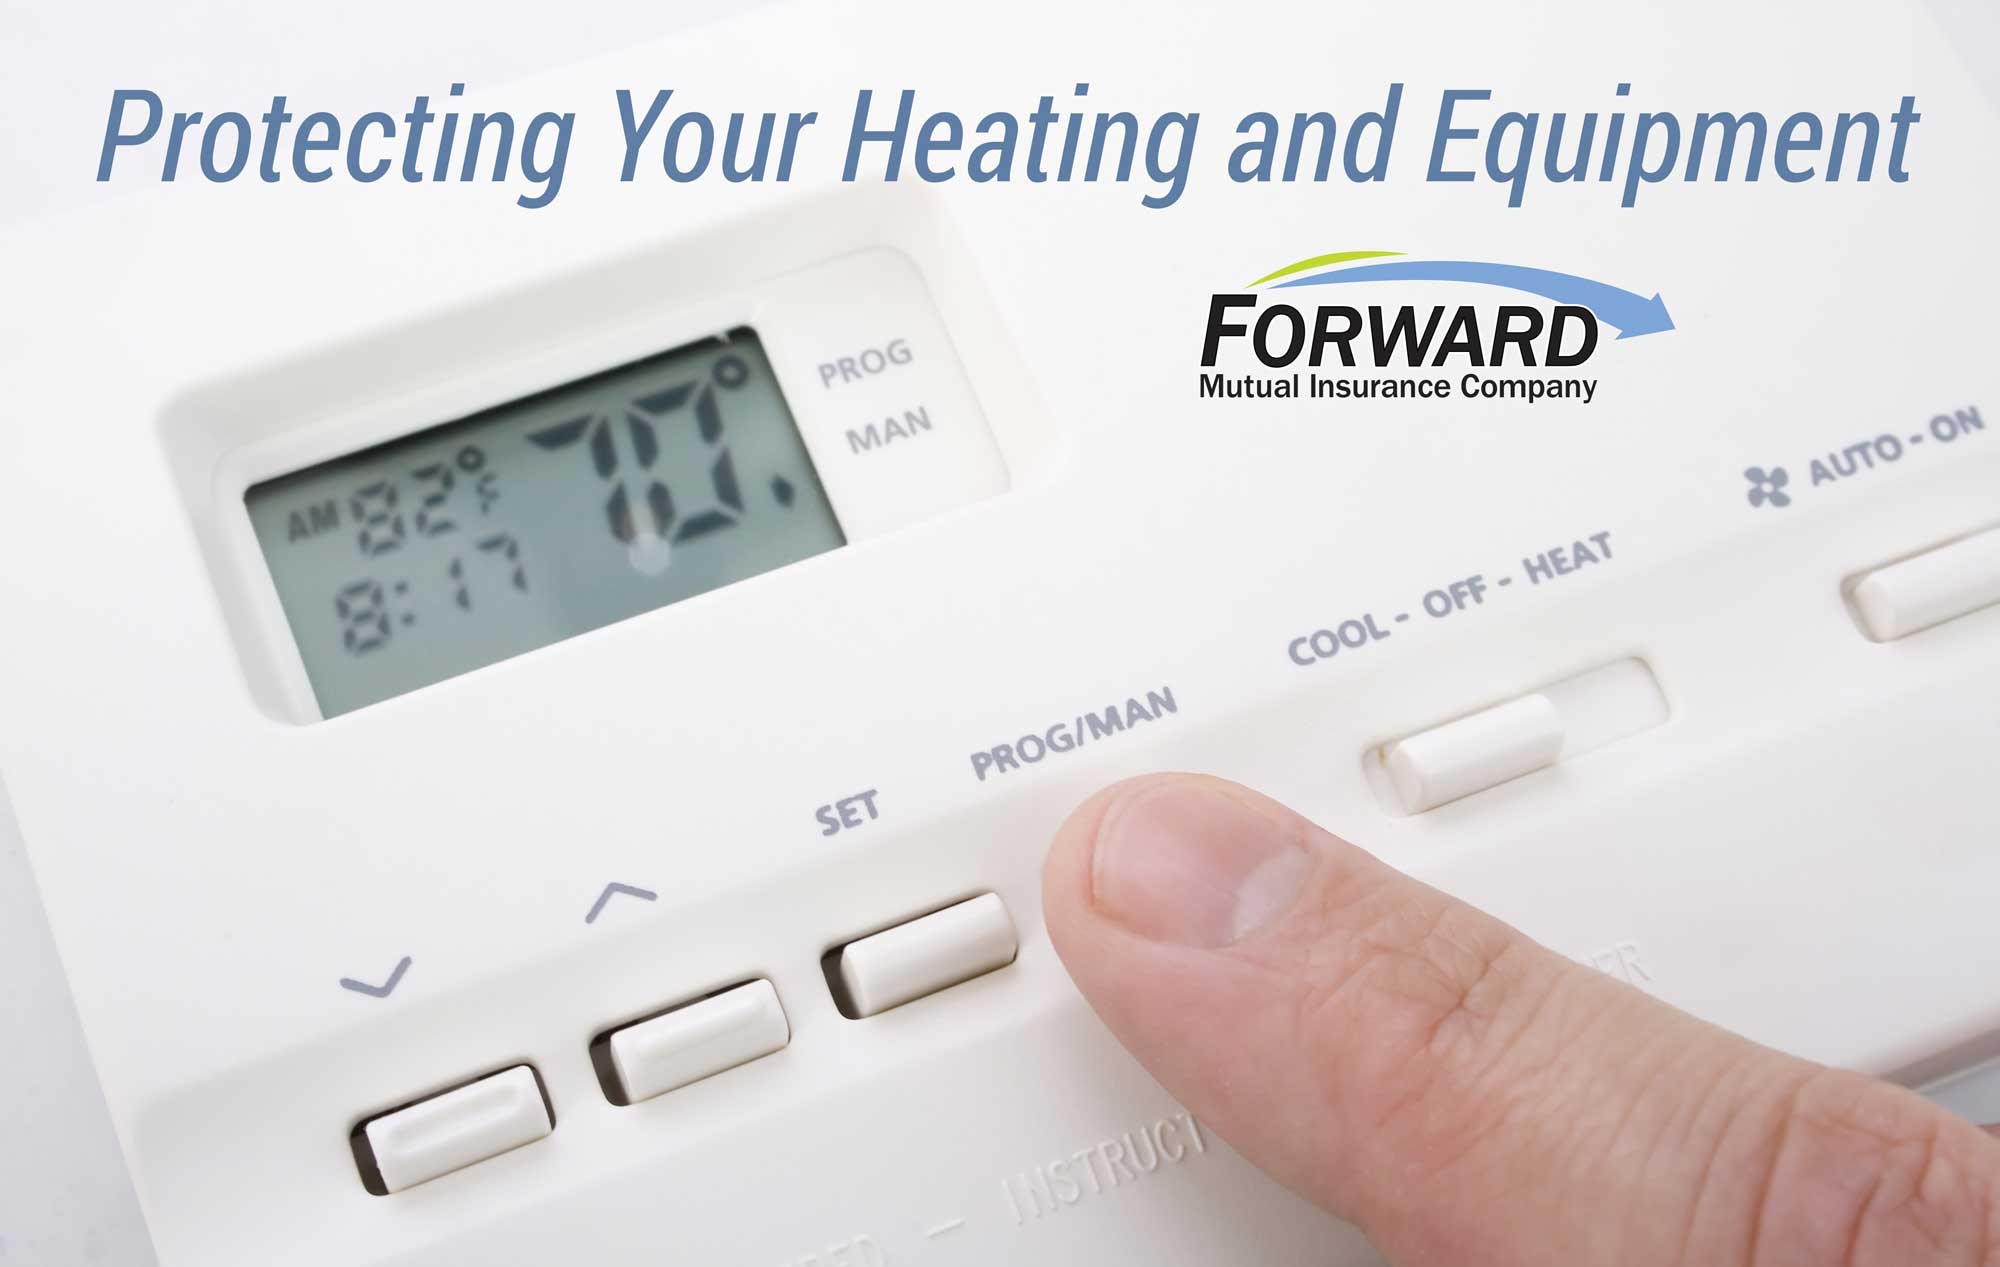 Forward Mutual offers protection against furnace breakdaown